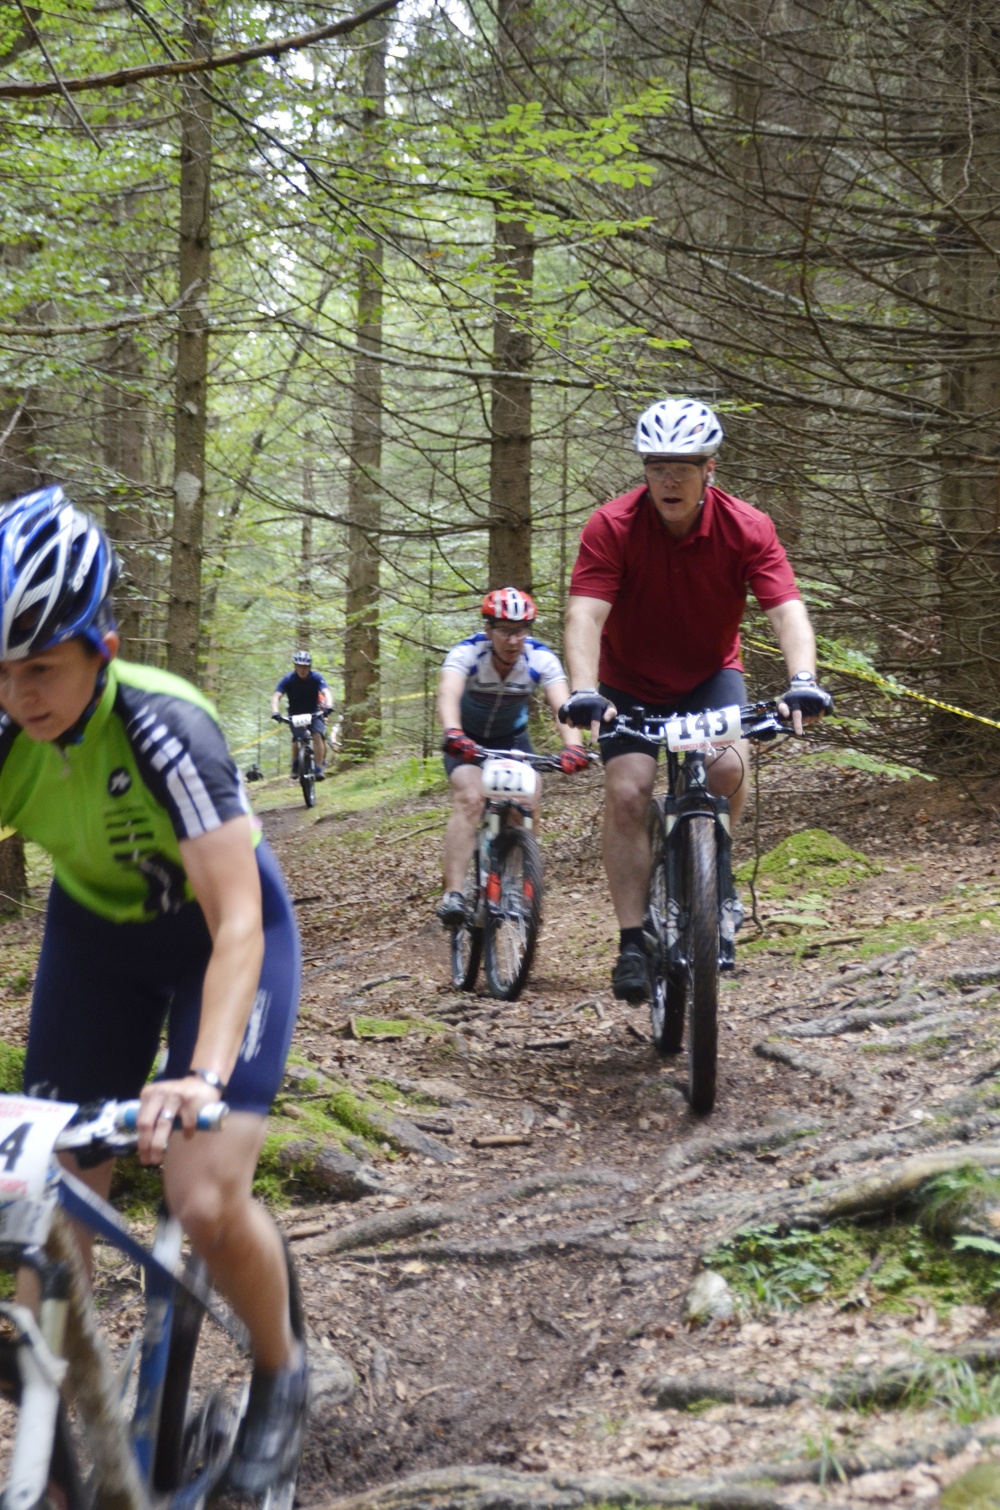 Marshall Center bike rider reflects on last fat tire race, closing of Kean’s Lodge